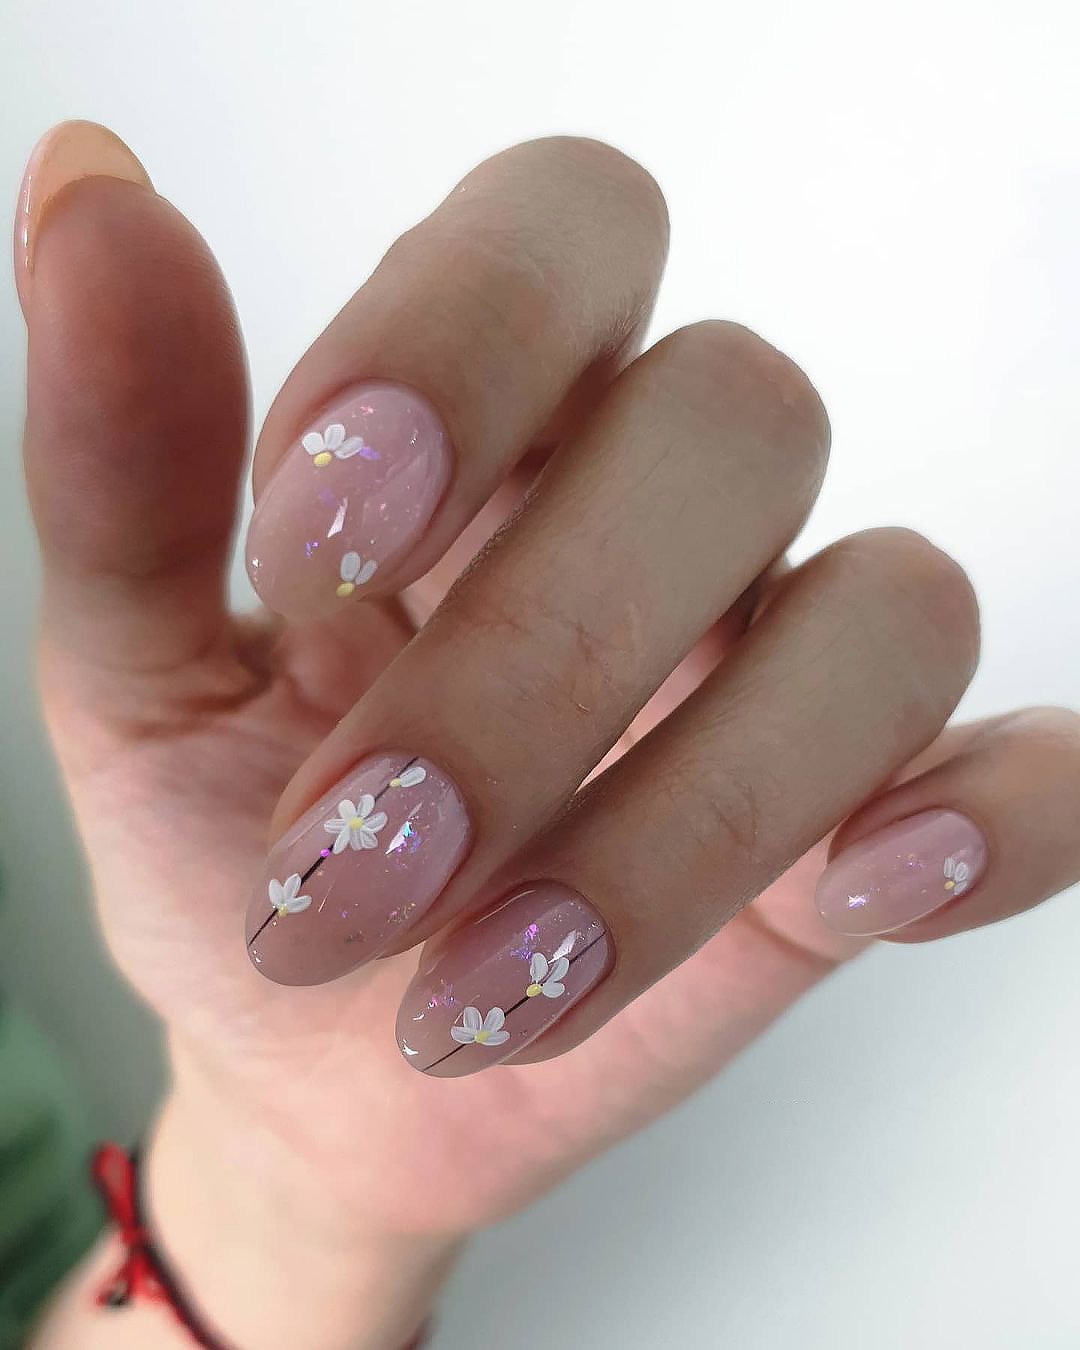 pink and white nails delicate with daisies kangannynails